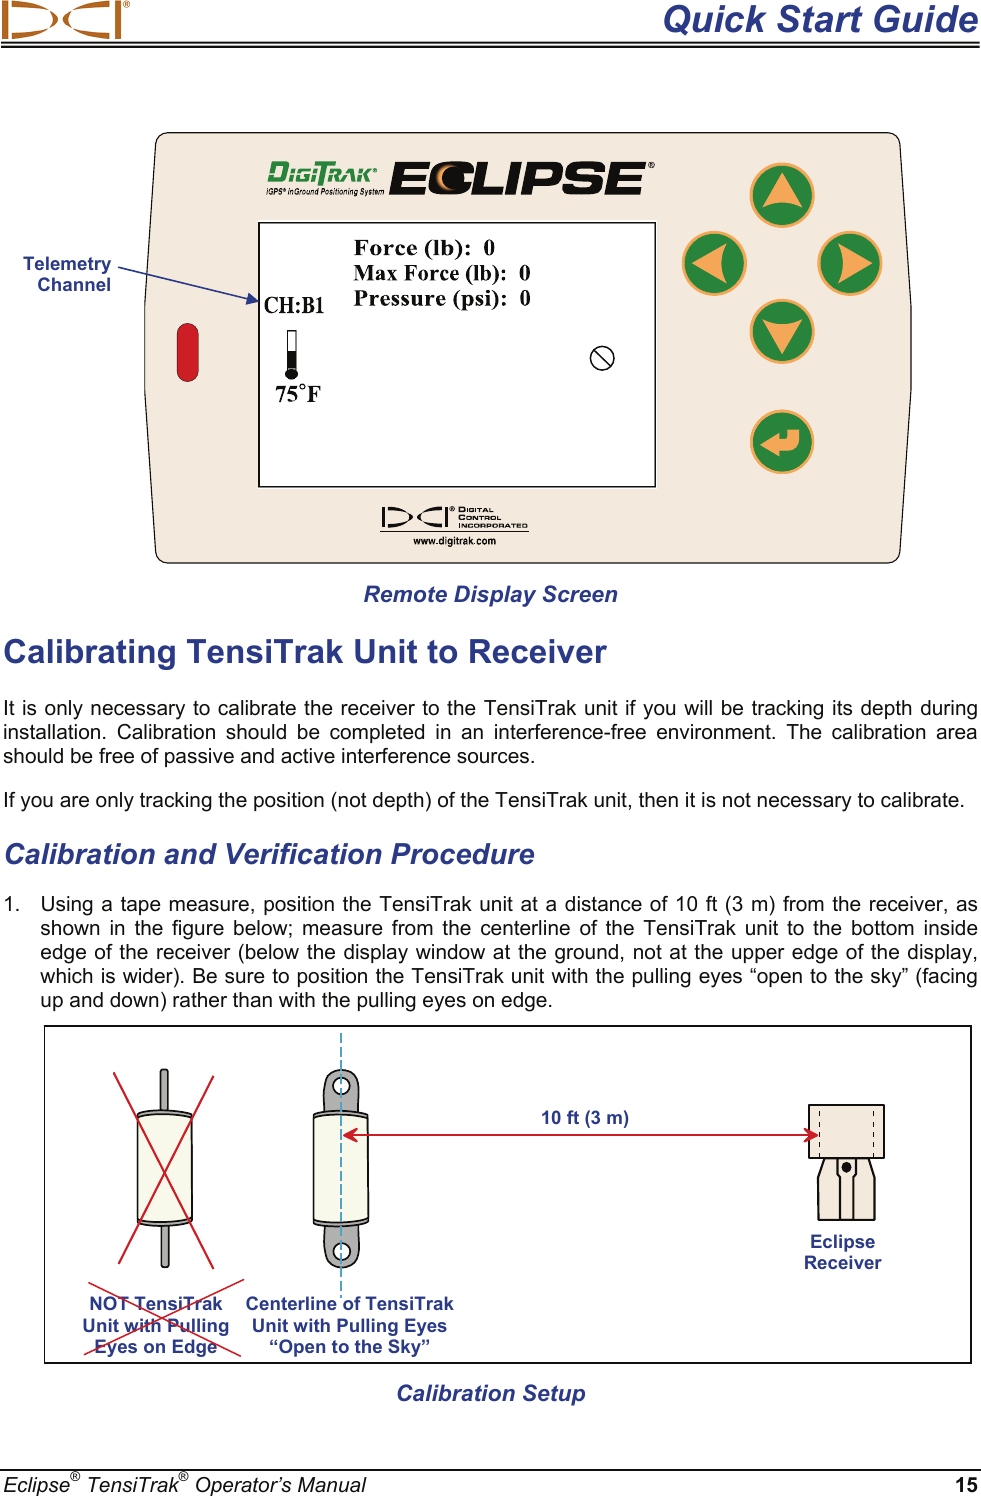  Quick Start Guide Eclipse® TensiTrak® Operator’s Manual 15                Remote Display Screen Calibrating TensiTrak Unit to Receiver It is only necessary to calibrate the receiver to the TensiTrak unit if you will be tracking its depth during installation. Calibration should be completed in an interference-free environment. The calibration area should be free of passive and active interference sources.  If you are only tracking the position (not depth) of the TensiTrak unit, then it is not necessary to calibrate. Calibration and Verification Procedure 1.  Using a tape measure, position the TensiTrak unit at a distance of 10 ft (3 m) from the receiver, as shown in the figure below; measure from the centerline of the TensiTrak unit to the bottom inside edge of the receiver (below the display window at the ground, not at the upper edge of the display, which is wider). Be sure to position the TensiTrak unit with the pulling eyes “open to the sky” (facing up and down) rather than with the pulling eyes on edge.                   Calibration Setup Centerline of TensiTrak Unit with Pulling Eyes “Open to the Sky” Eclipse Receiver 10 ft (3 m)Telemetry Channel NOT TensiTrak  Unit with Pulling  Eyes on Edge 